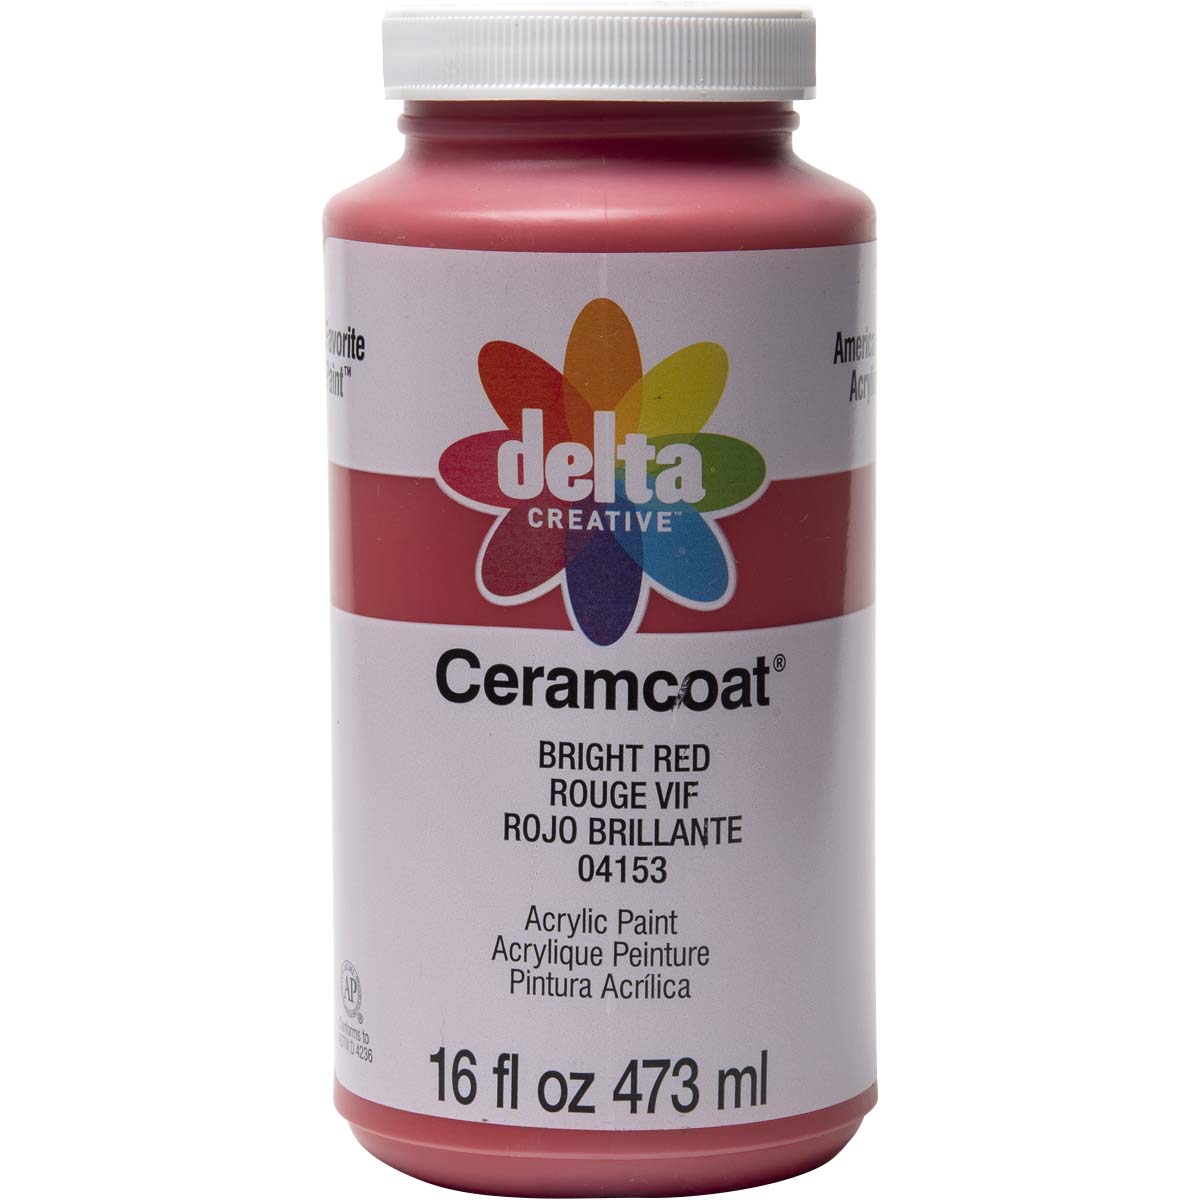 Delta Ceramcoat ® Acrylic Paint - Bright Red, 16 oz. - 04153